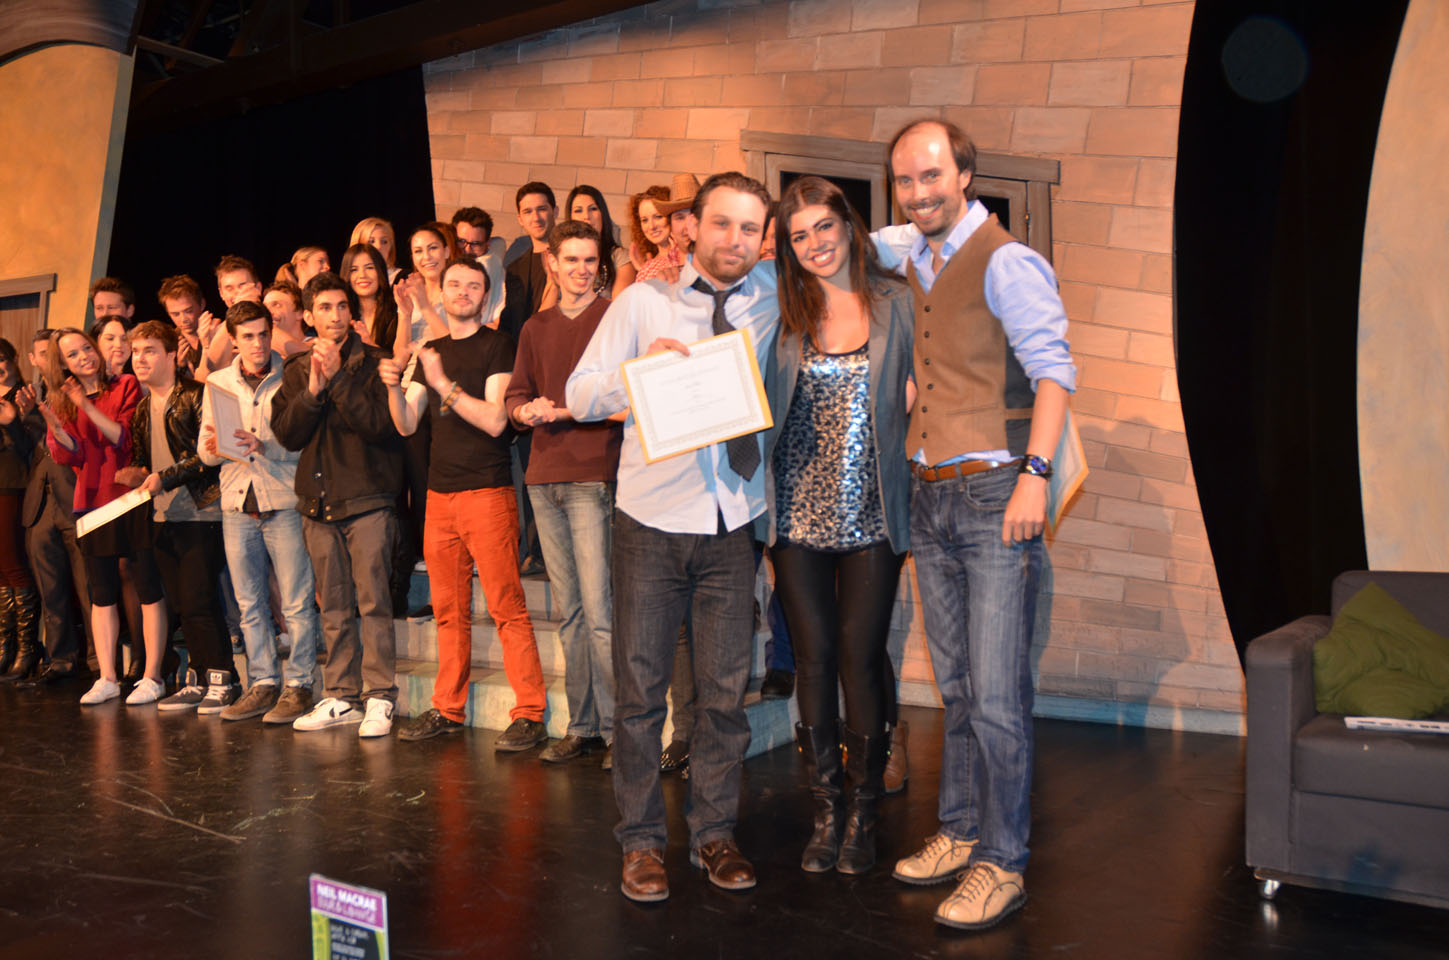 Conor Gomez and Kristina Tywoniuk accepting the 2nd place award in the scene category at VADA's 2013 Showcase.